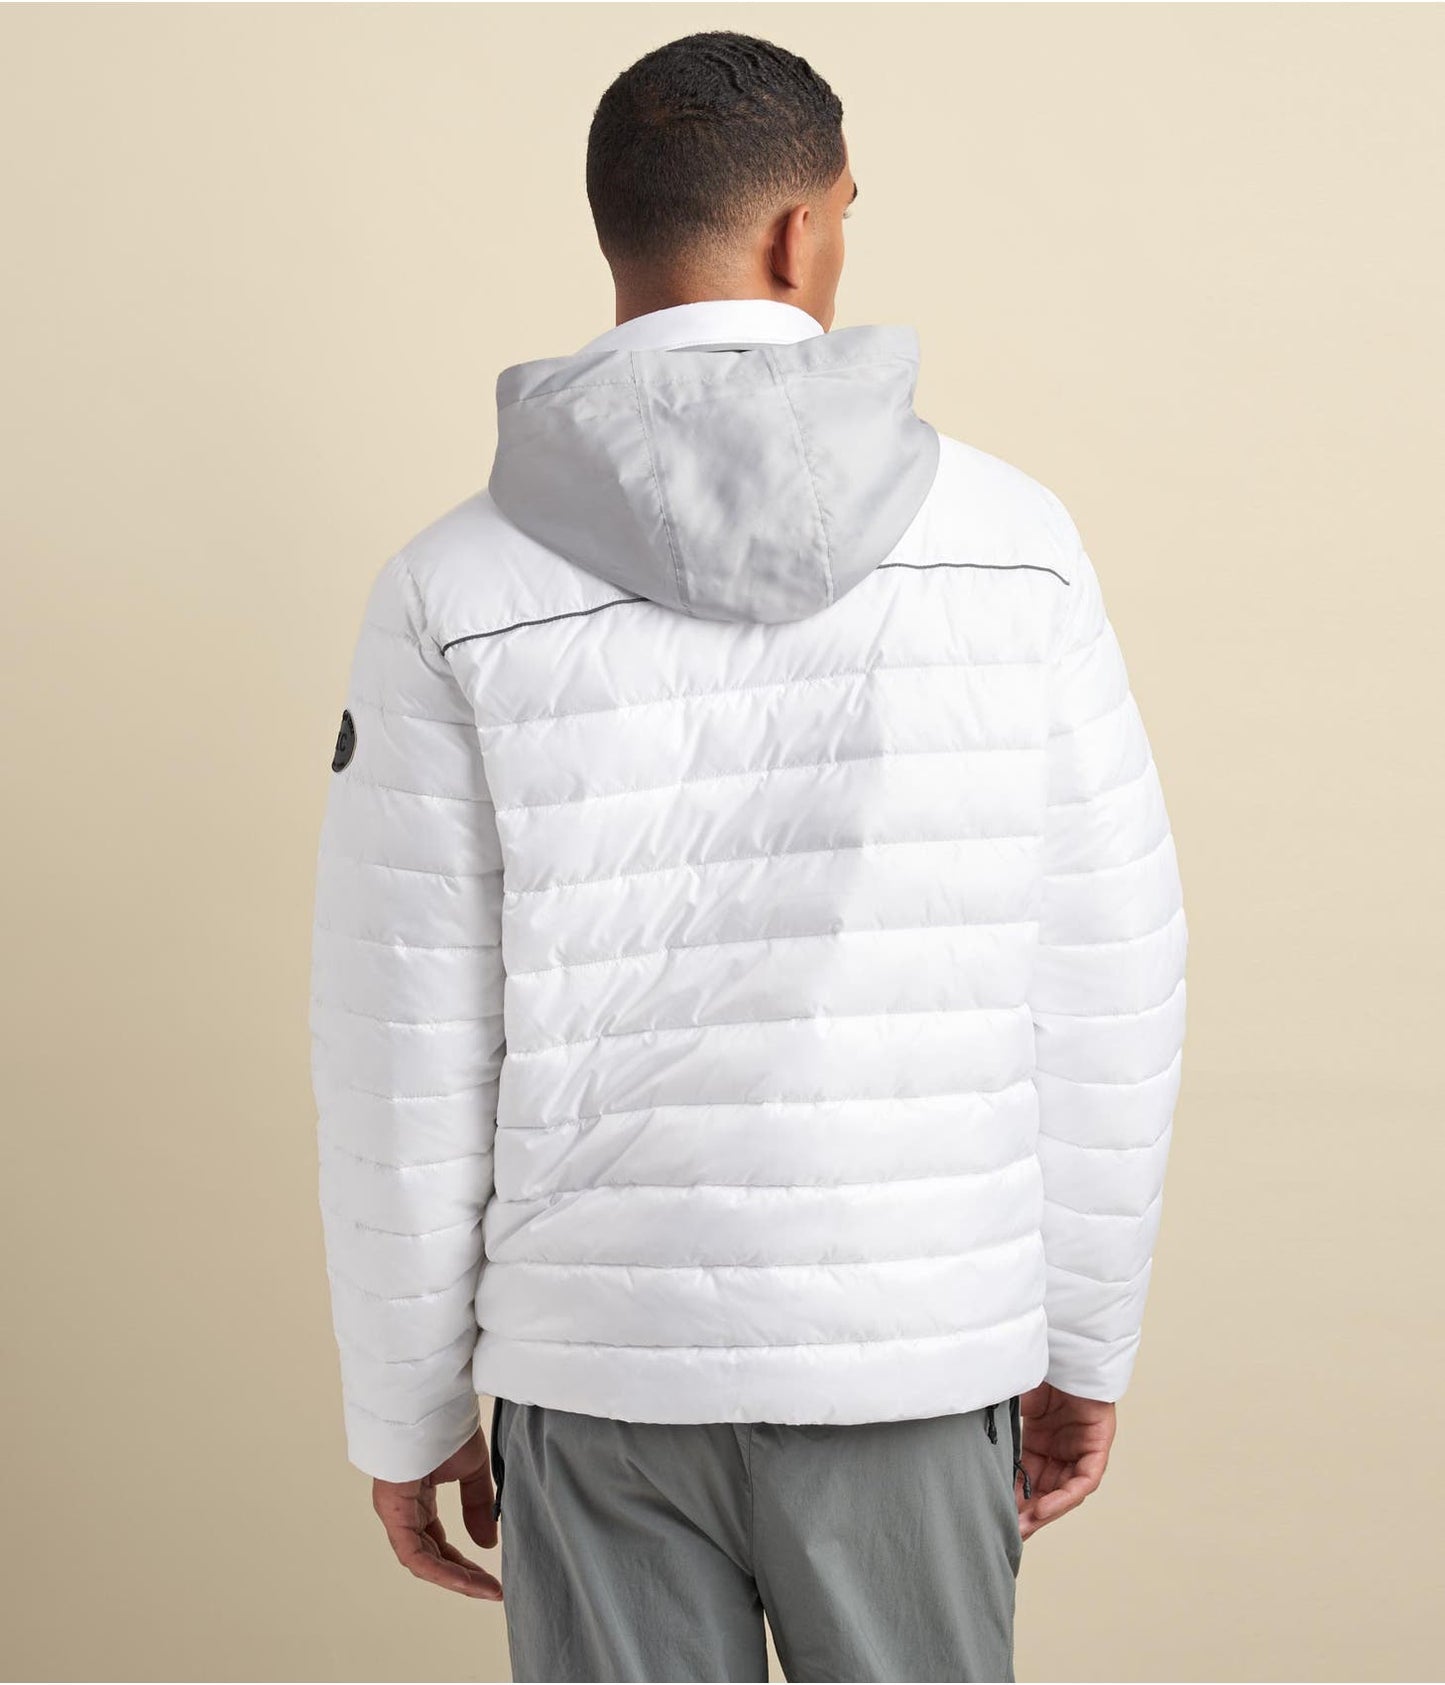 Men's Puffer Leather Jacket In White With Removable Hood